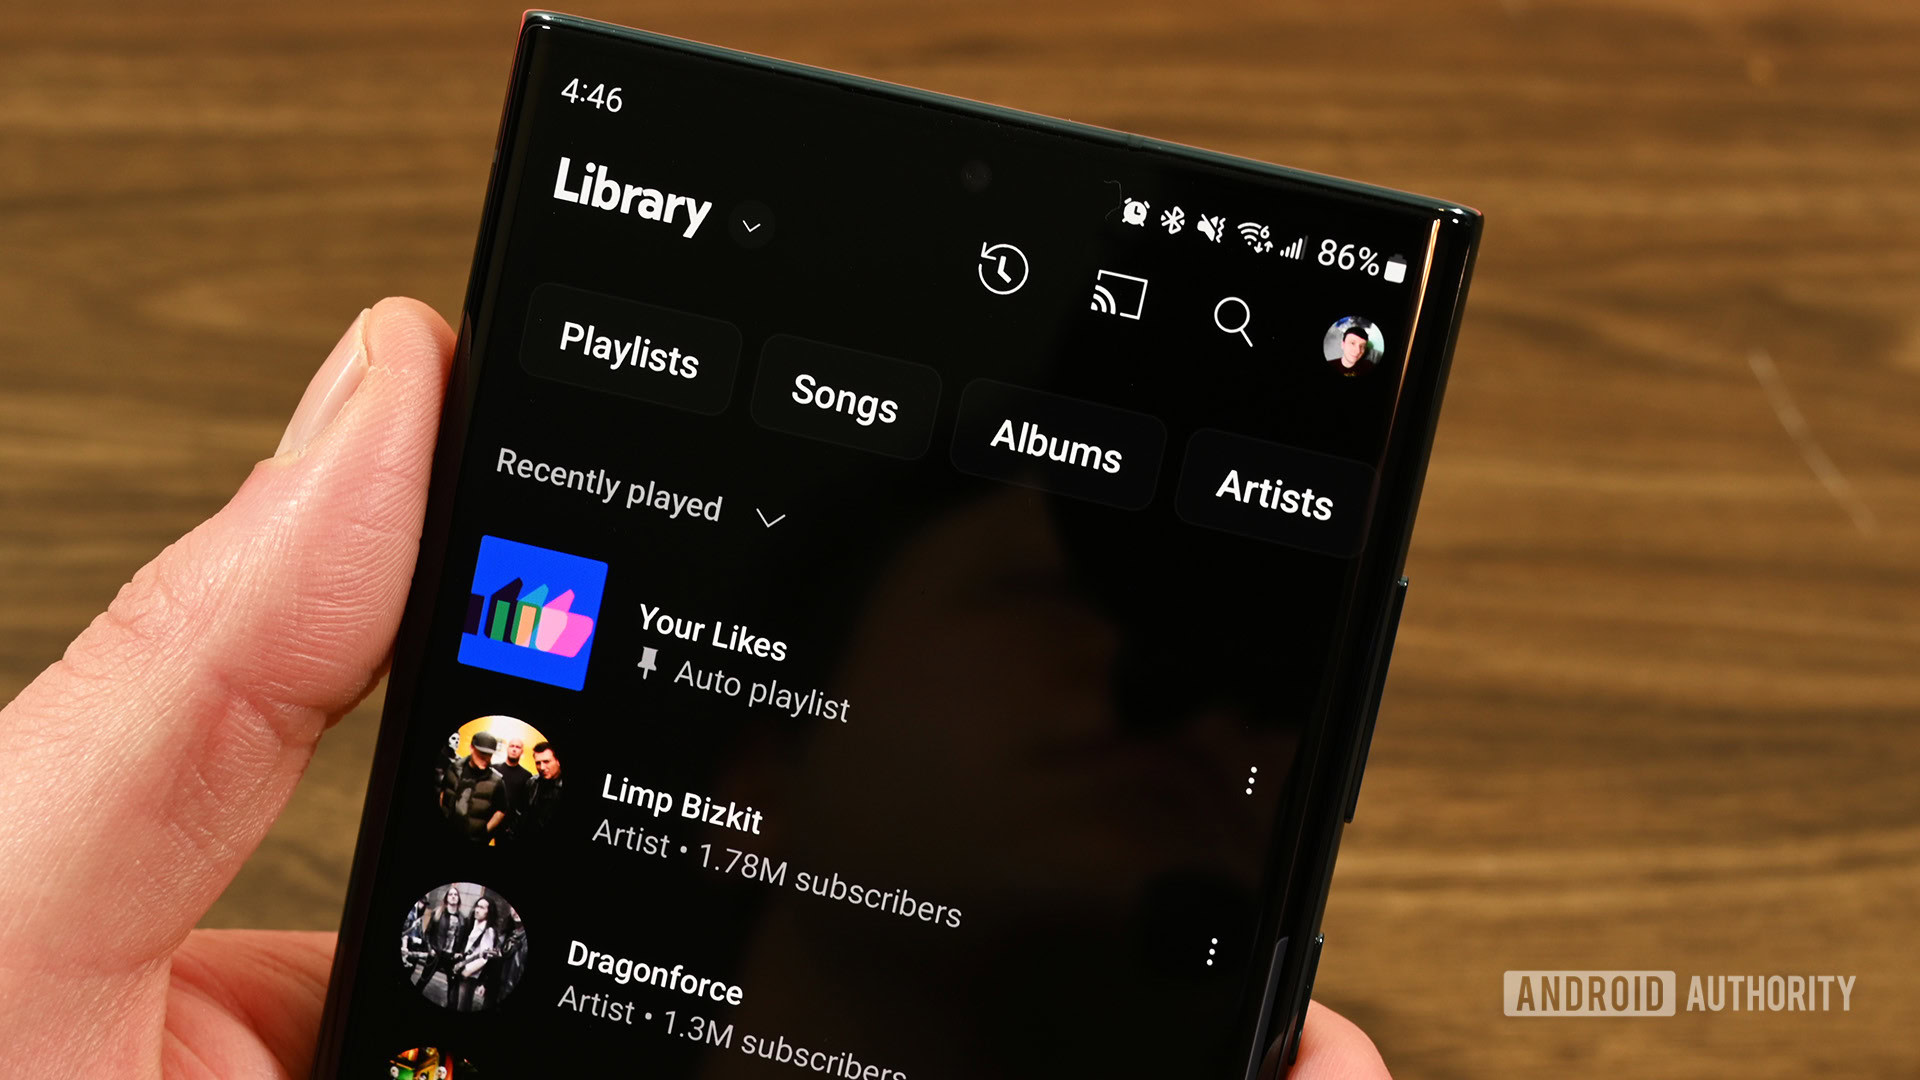 Smartphone in hand on a wooden background with YouTube Music's Library page open on the screen.